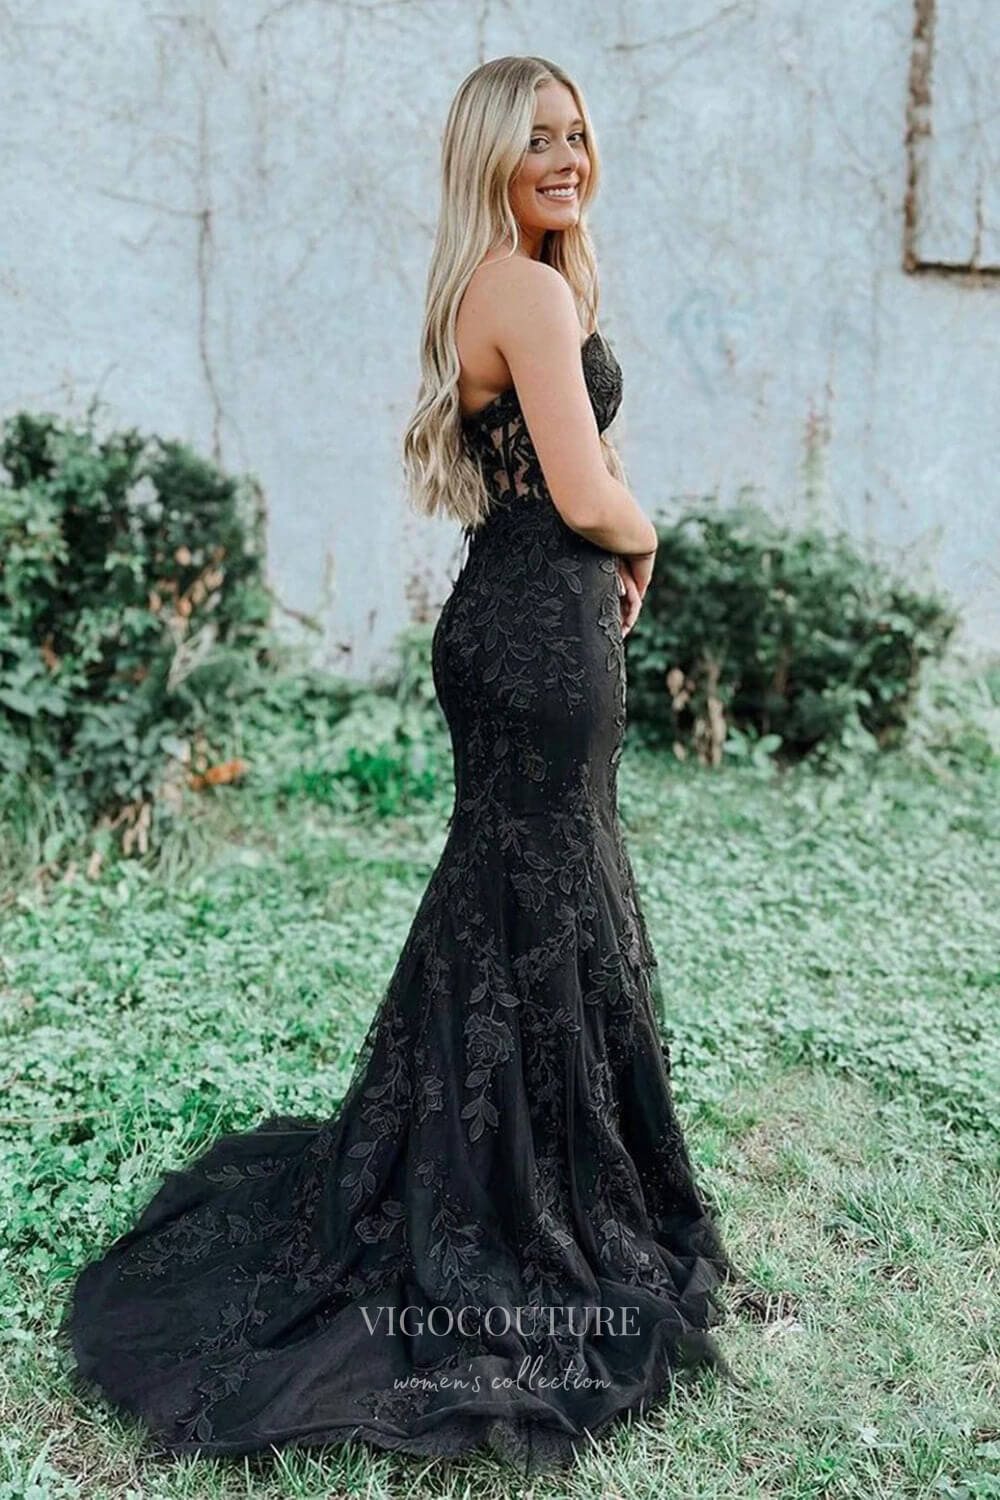 Strapless Lace Applique Prom Dresses with Corset Back Mermaid Evening Dress 22168-Prom Dresses-vigocouture-Red-US2-vigocouture